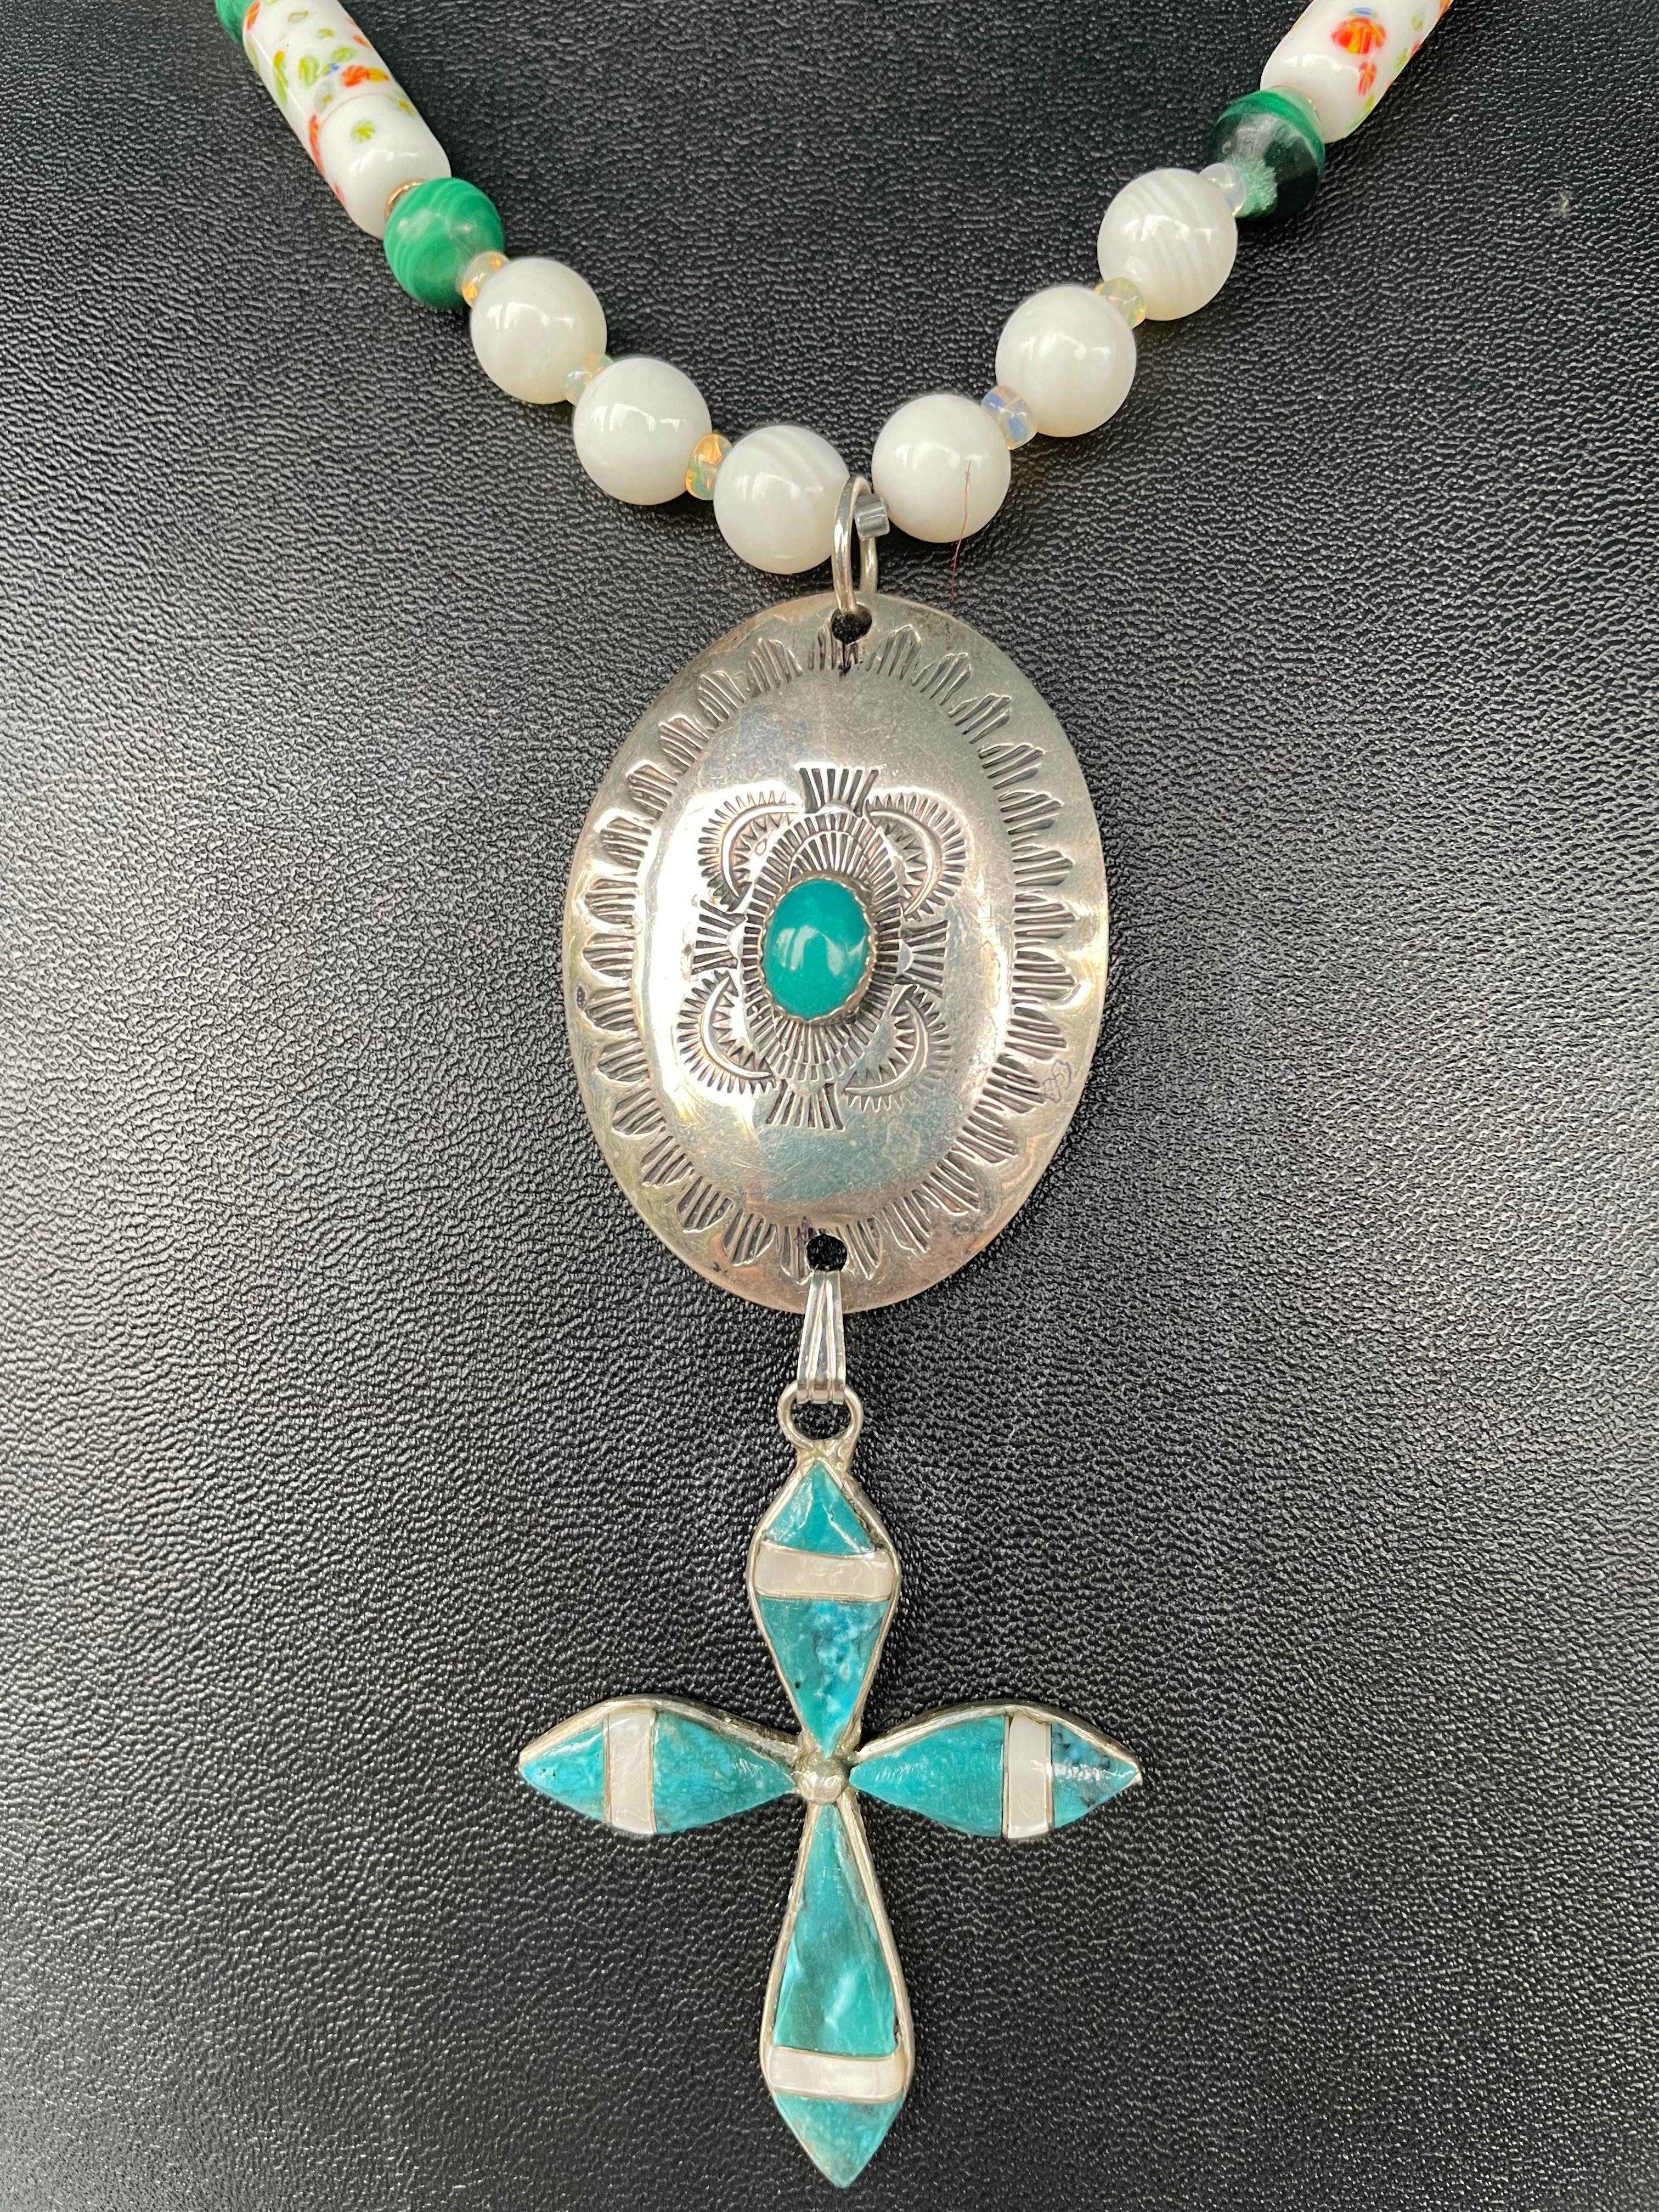 One of a kind,handmade,statement necklace is on offer from Lorraine’s Bijoux. Mother of pearl,malachite,sterling silver ,vintage concha brooch and vintage artisan cross comprise the pendant.Vintage mother of pearl,malachite beads,and vintage